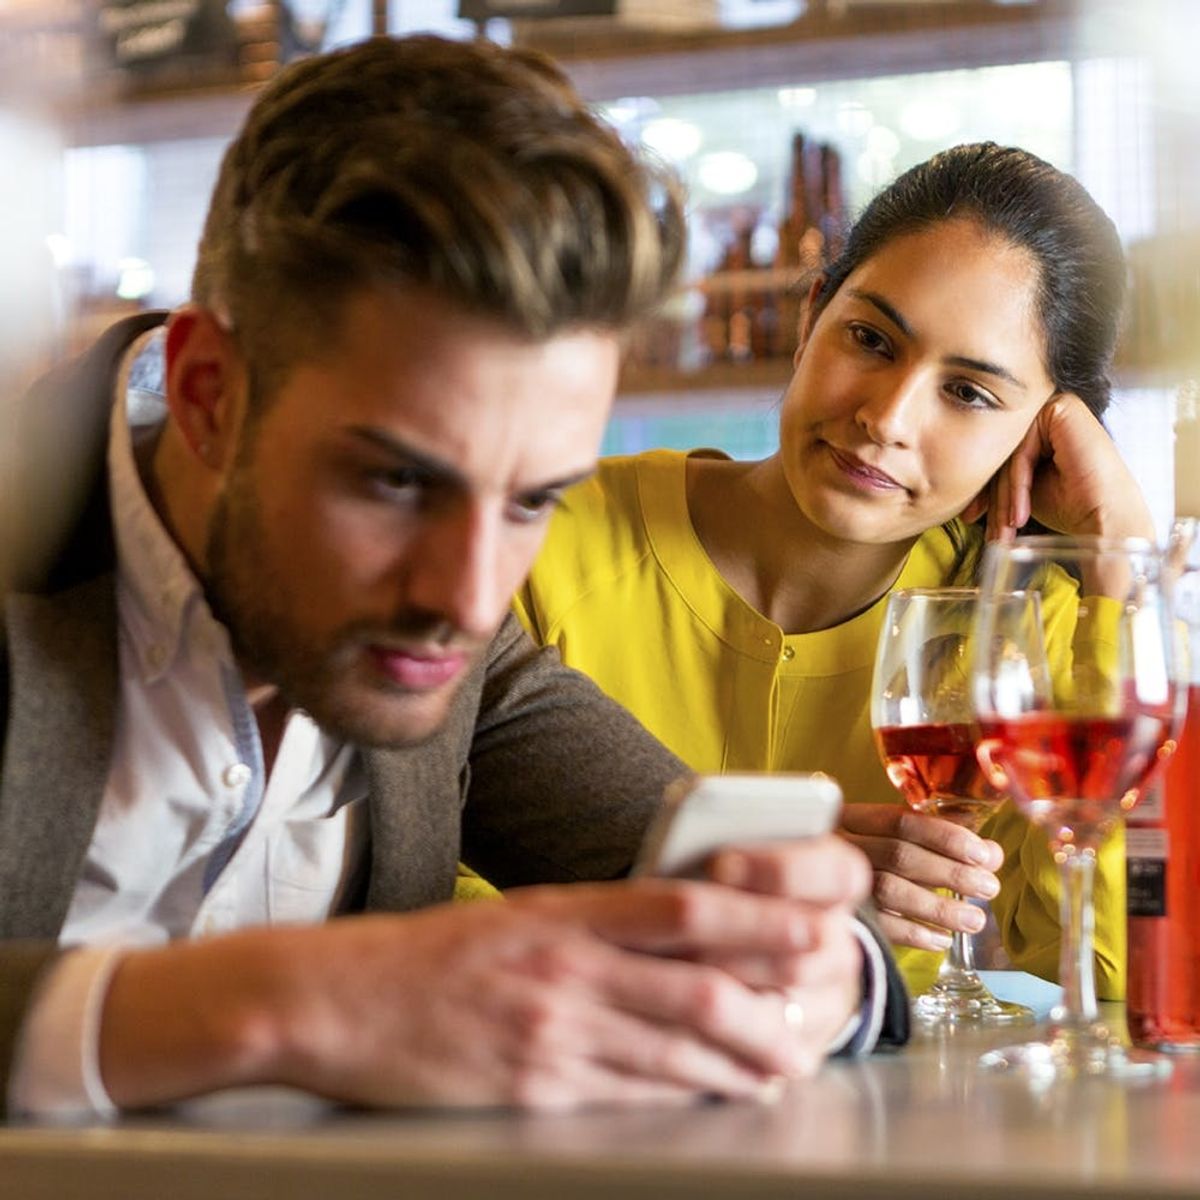 The Creative Way This Bar Will Help You Get Out of a Bad Tinder Date